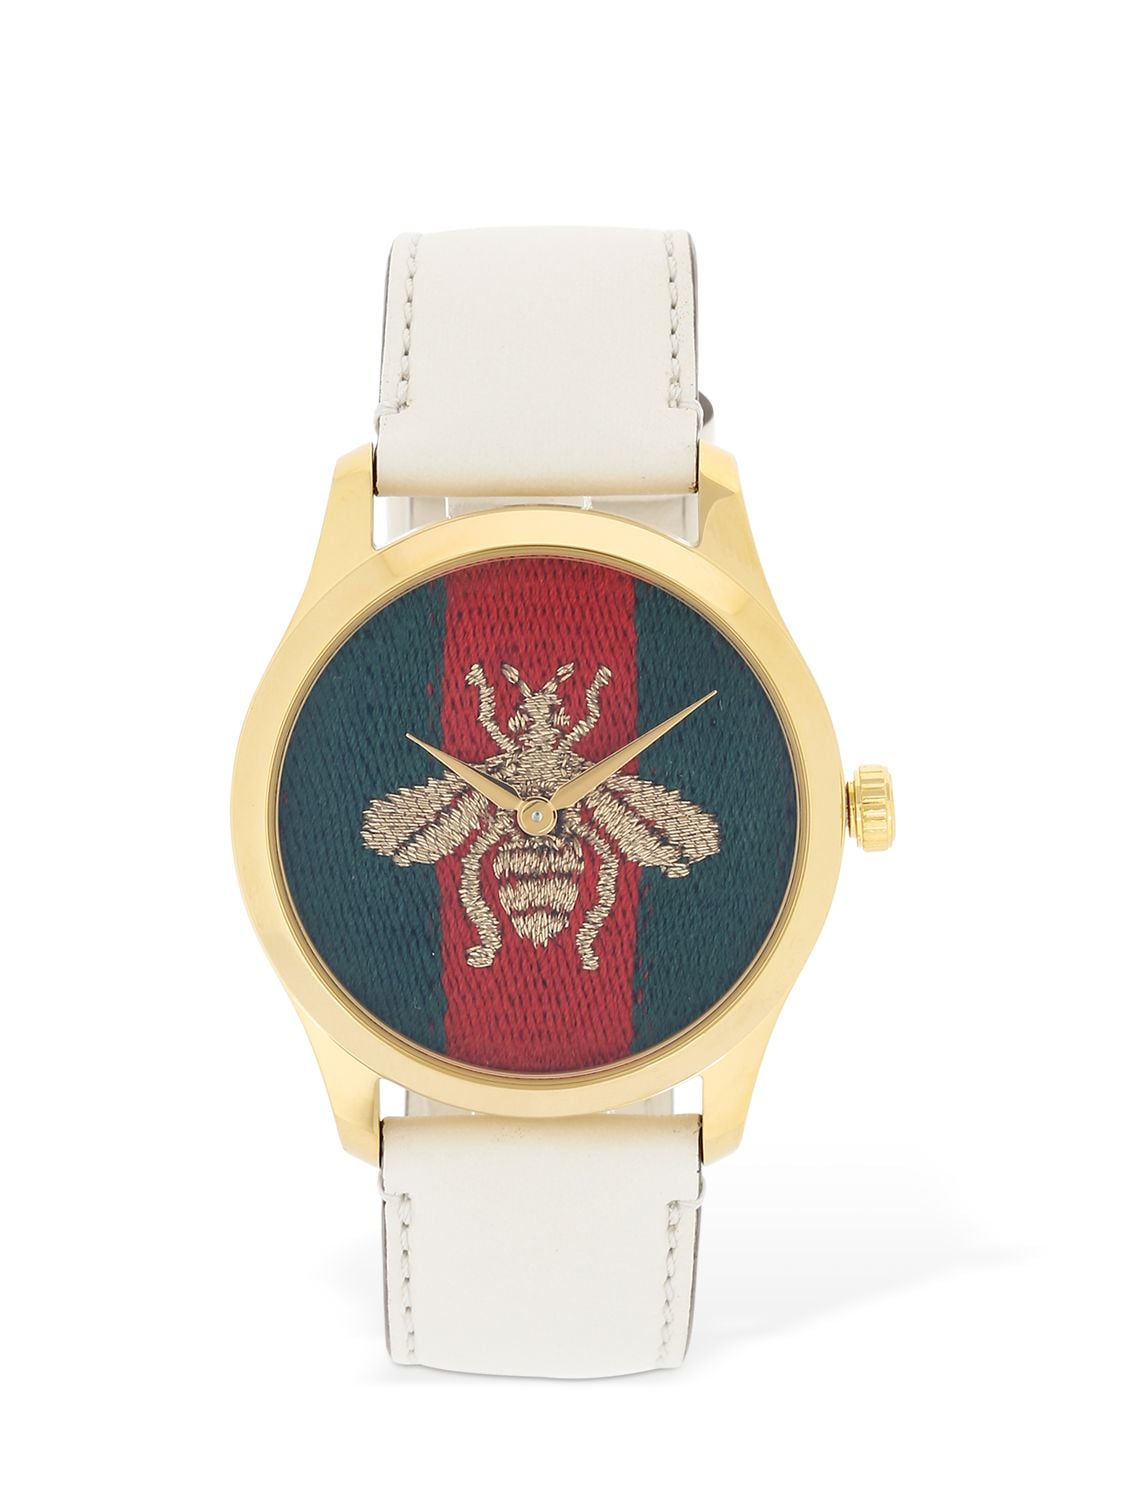 GUCCI EMBROIDERED BEE LEATHER WATCH,71IWV6008-WUEXMJY0MTI40